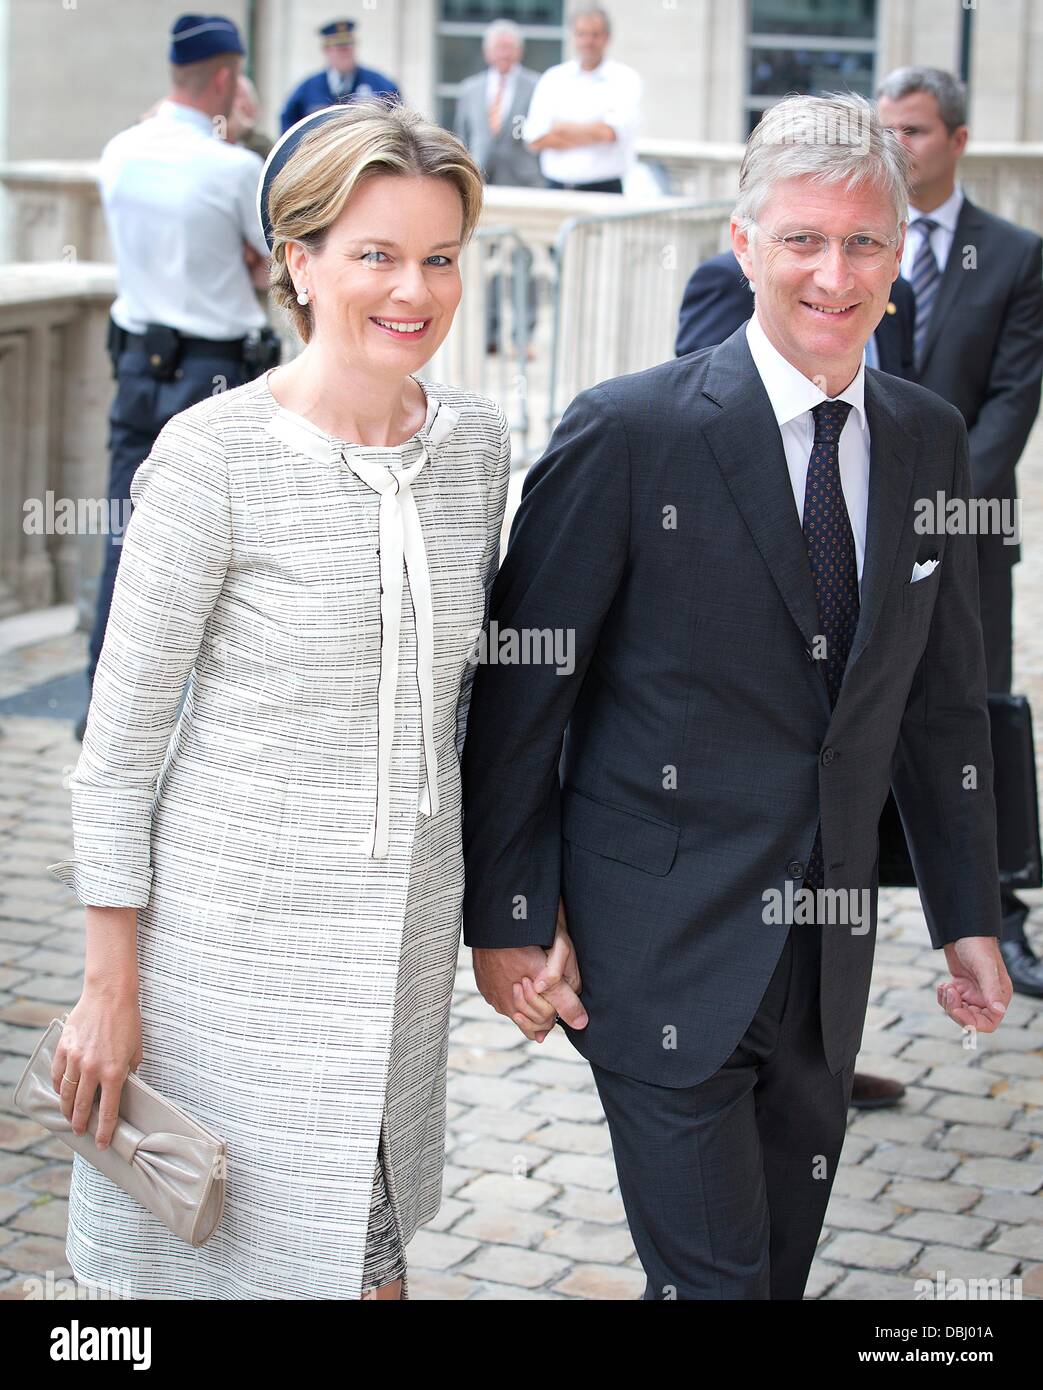 Brussels, Belgium. 31st July, 2013. King Philippe (Filip) and Queen Mathilde of Belgium attend the mass to commemorate the death of King Baudouin 20 years ago at the Cathedral in Brussels, Belgium, 31 July 2013. Photo: Patrick van Katwijk/dpa/Alamy Live News Stock Photo